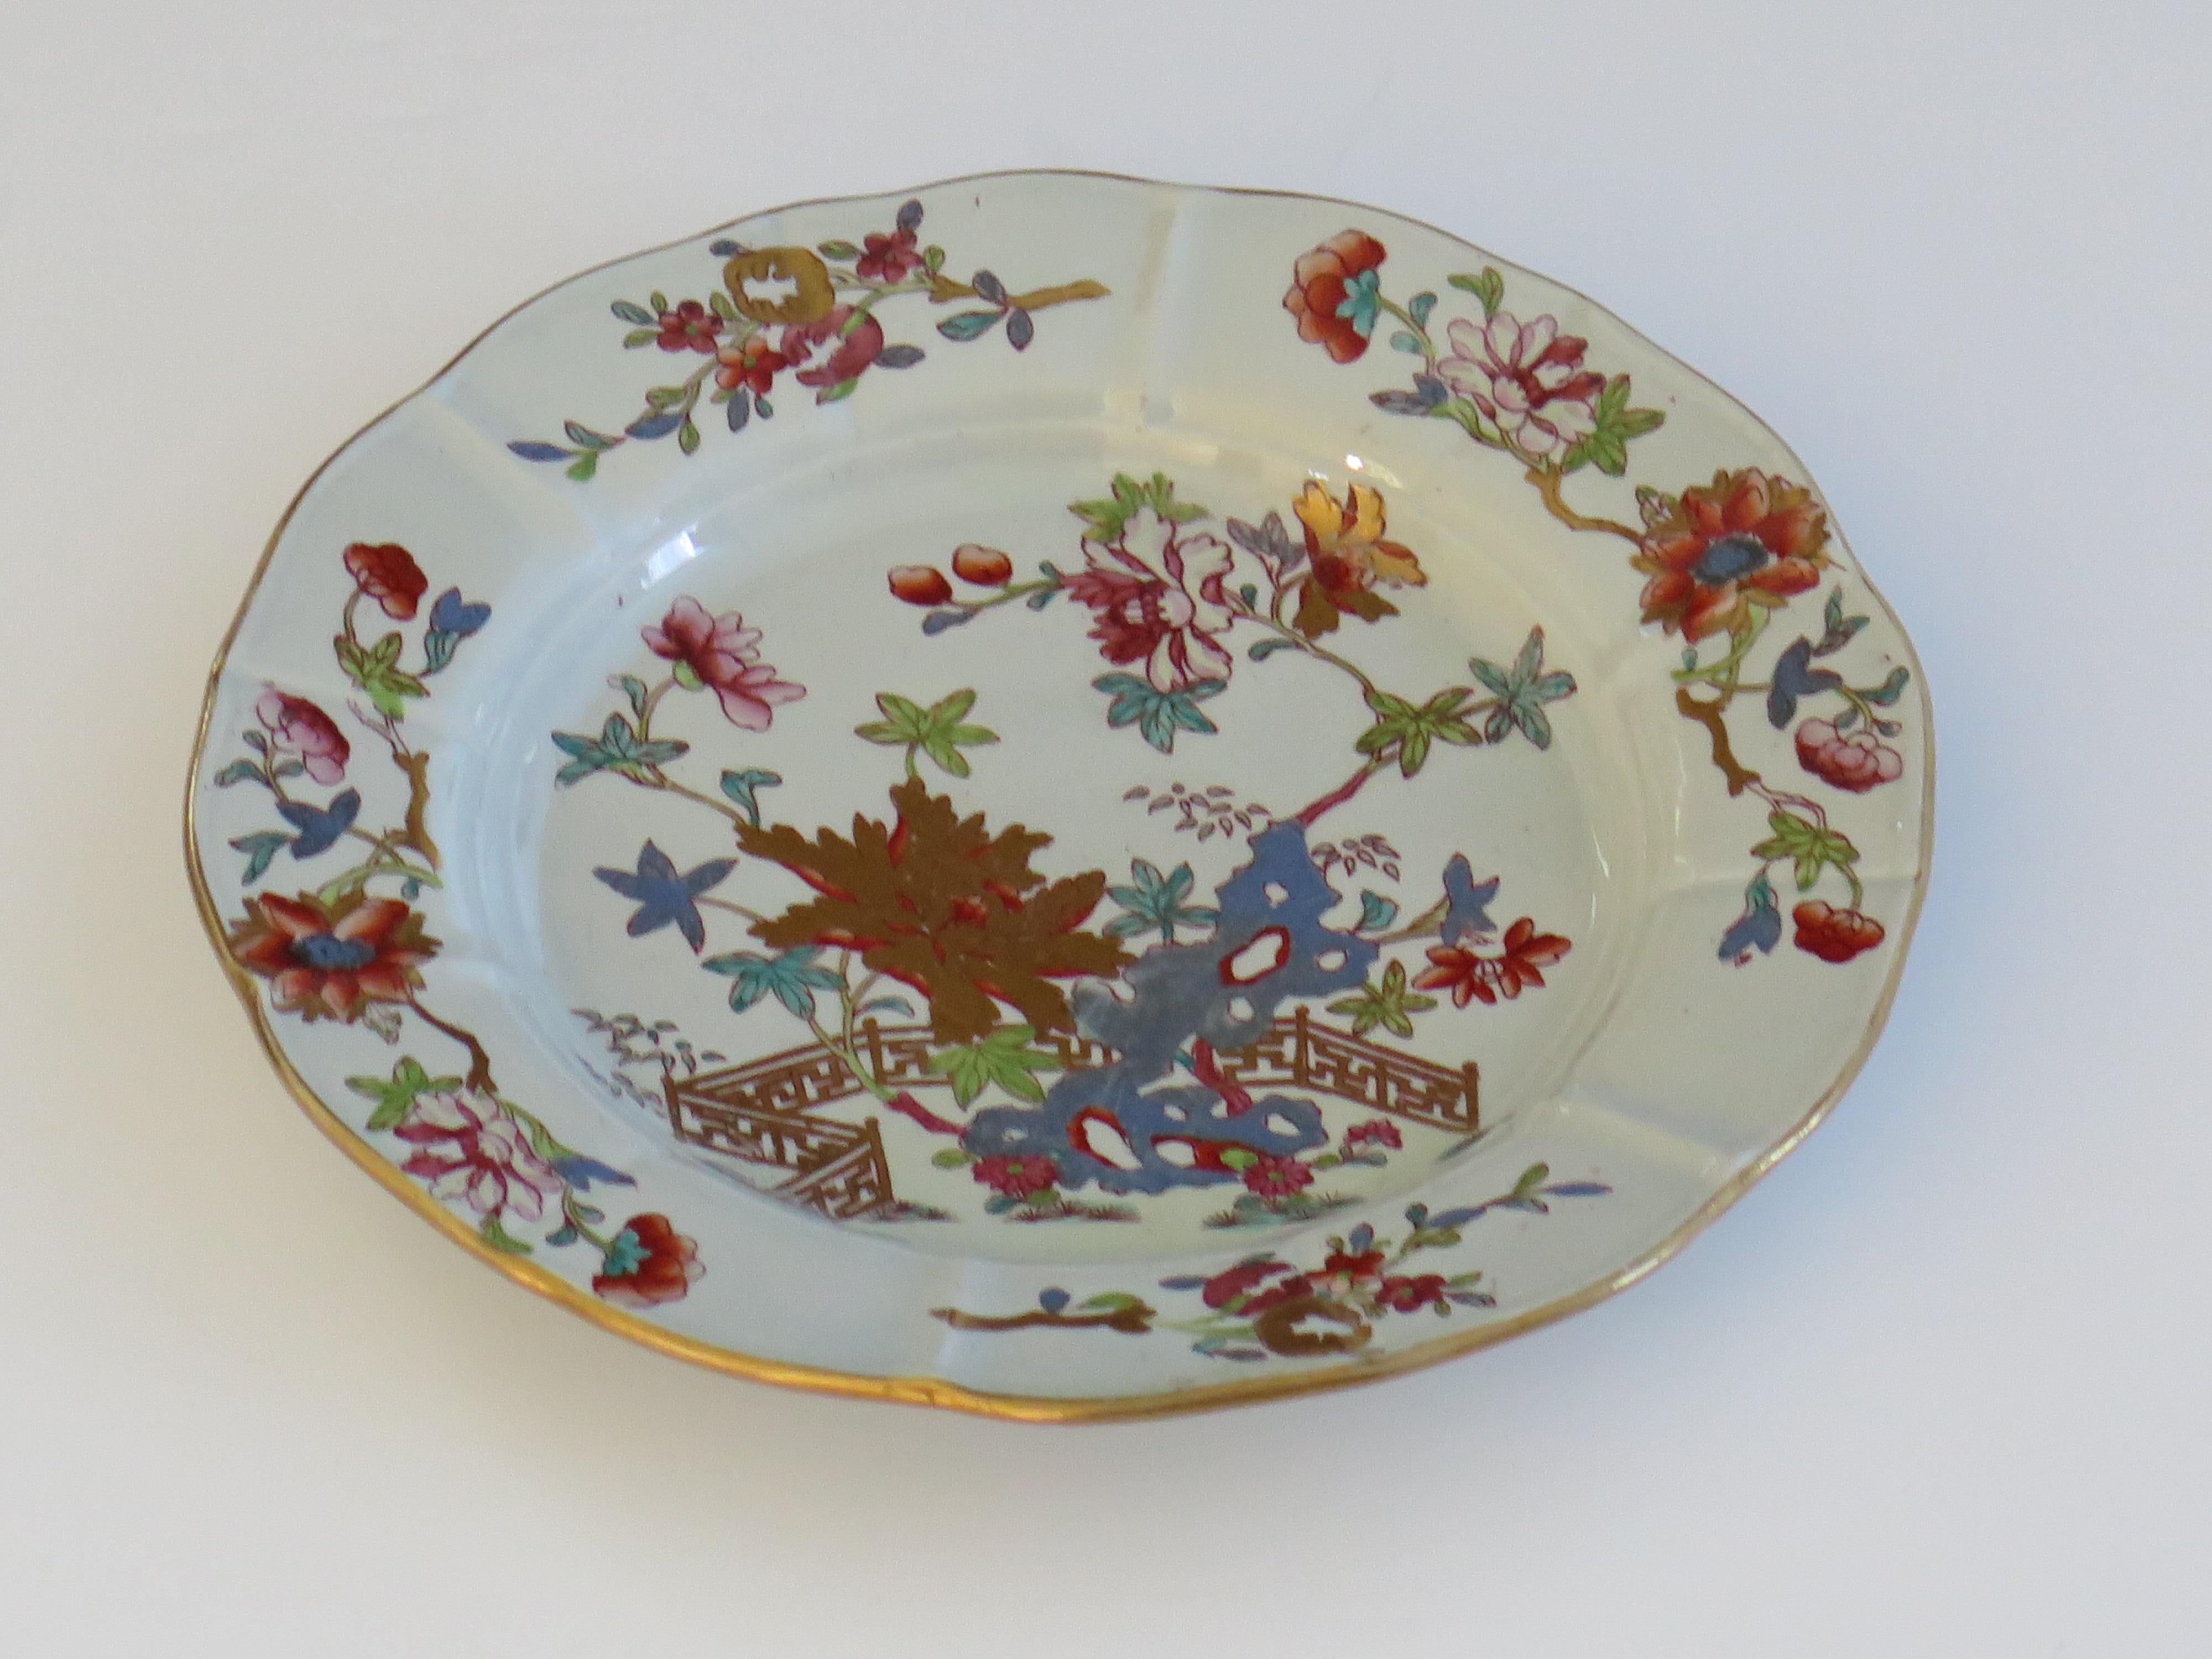 This is a very good hand painted Mason's ironstone Desert Plate, in the Fence, Rock and Tree gilded pattern, from their earliest George IIIrd period, circa 1818.

The piece is well potted with a circular shape having a wavy edge and ribbed radial